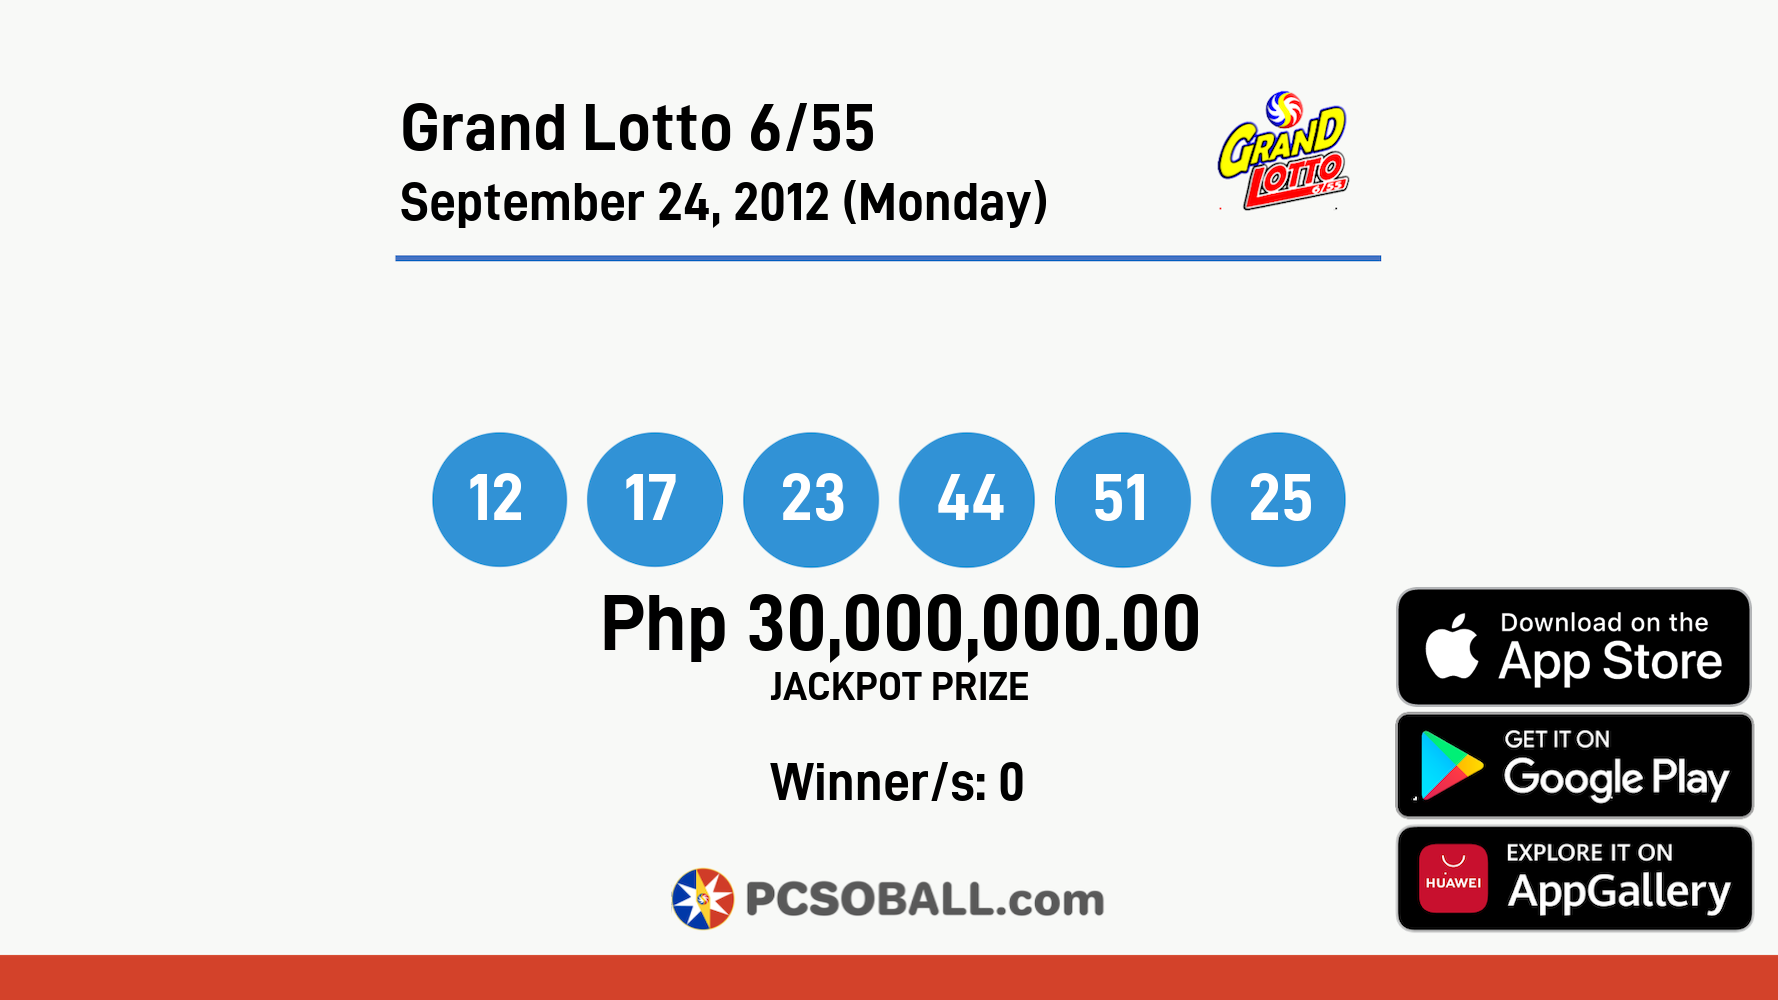 Grand Lotto 6/55 September 24, 2012 (Monday) Result